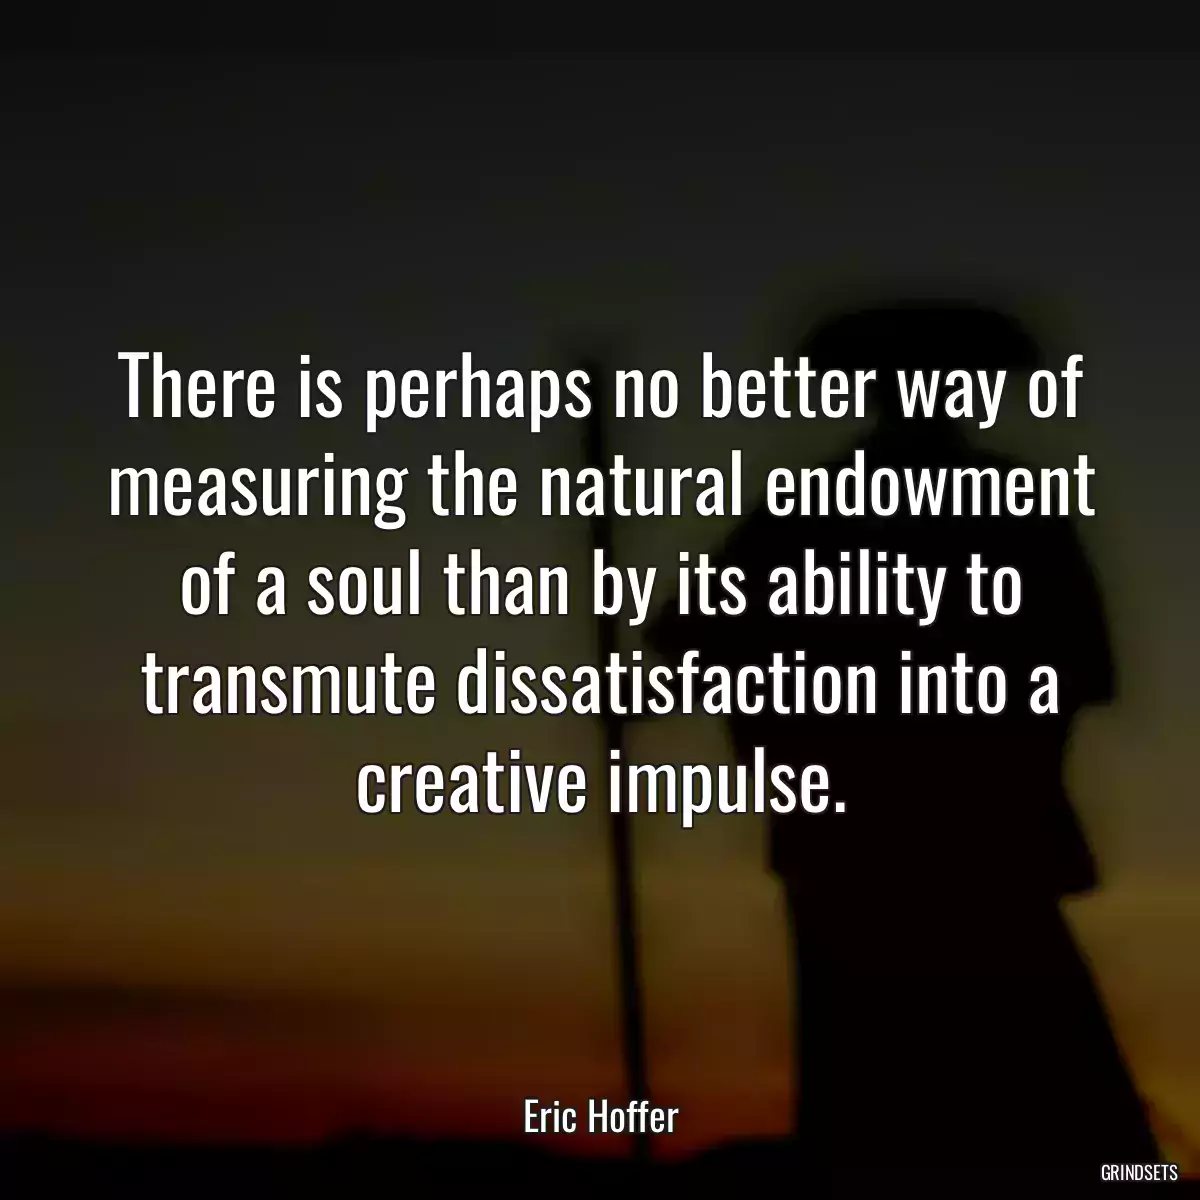 There is perhaps no better way of measuring the natural endowment of a soul than by its ability to transmute dissatisfaction into a creative impulse.